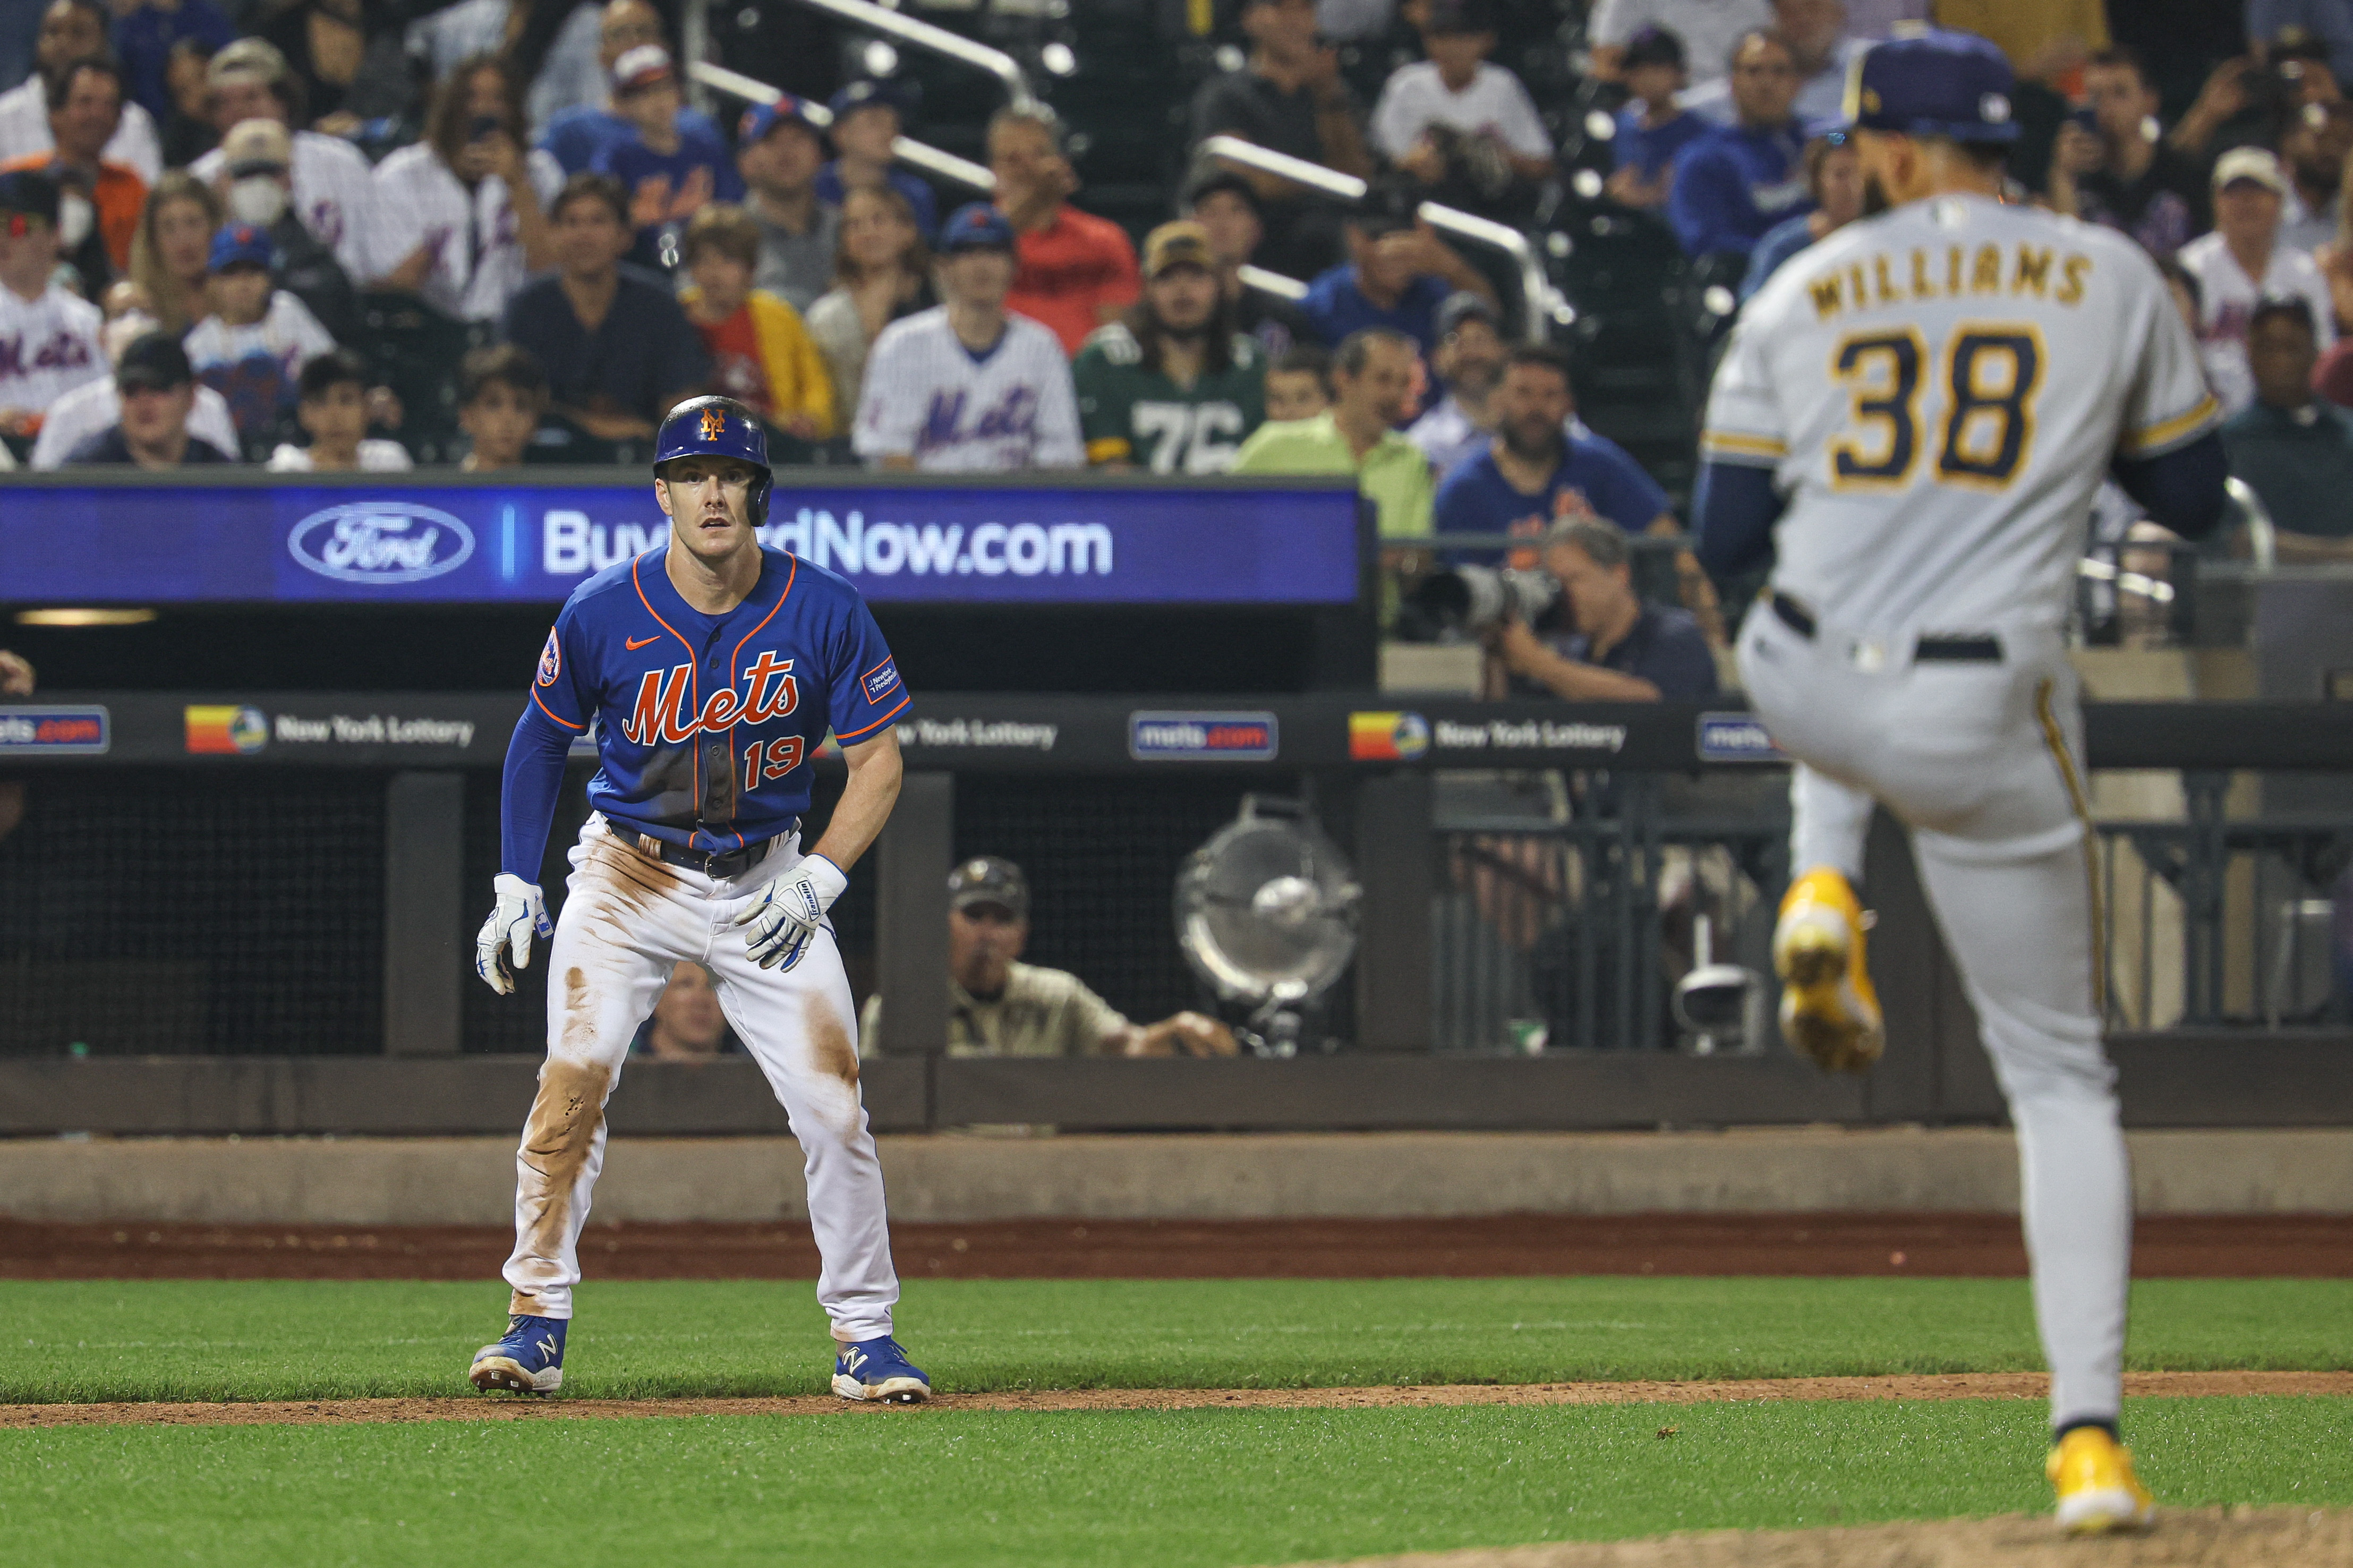 Mets leave the bases loaded while down by one when Devin Williams strikes  out Starling Marte for the save.